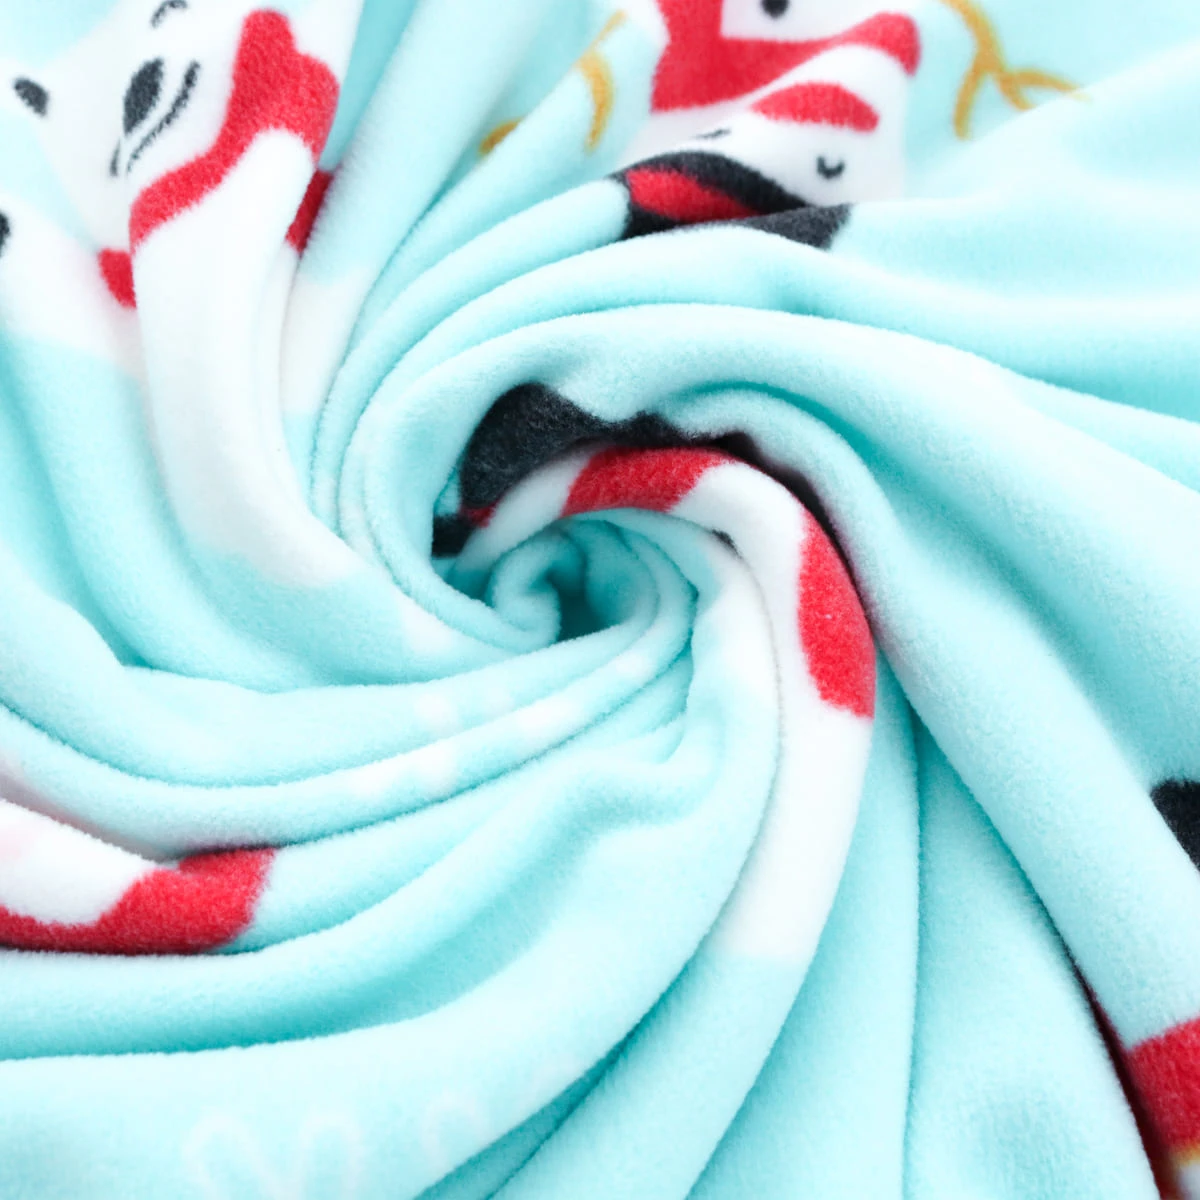 Happy Snow Printed Fleece Reversible to White Plush Baby Blanket with Foldover Edging (Mint Green)